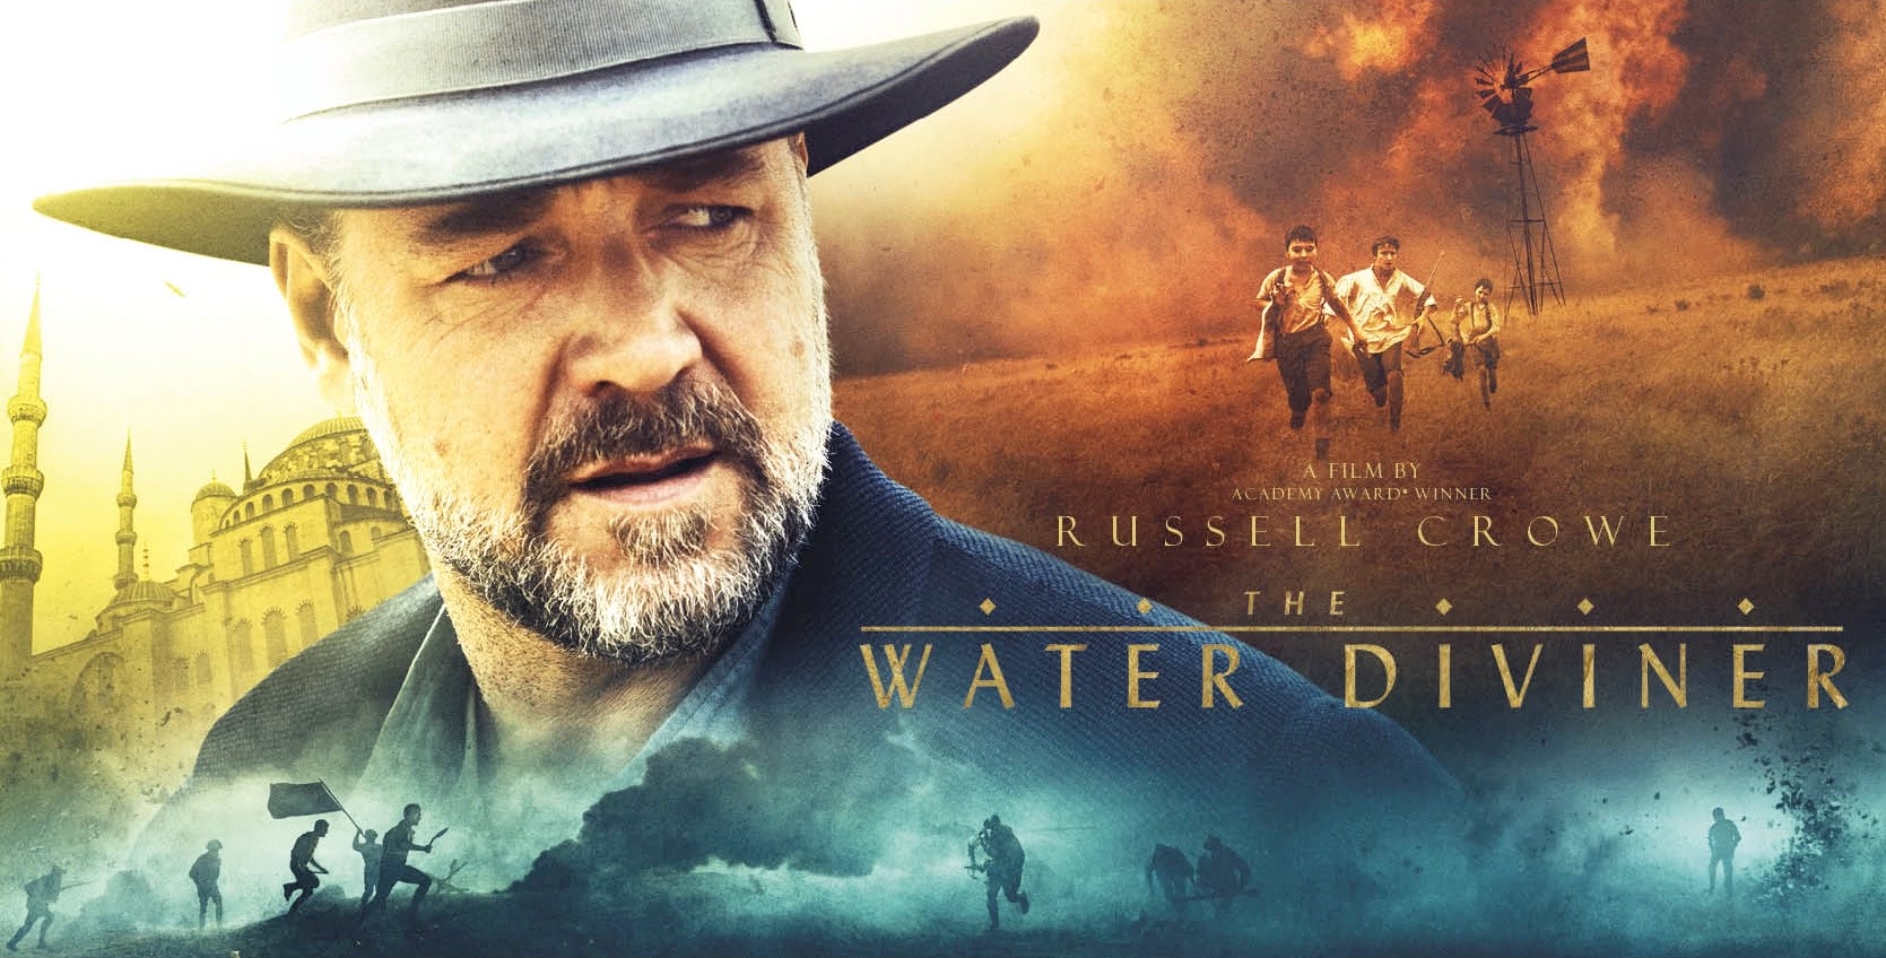 The Water Diviner | www.youtube.com